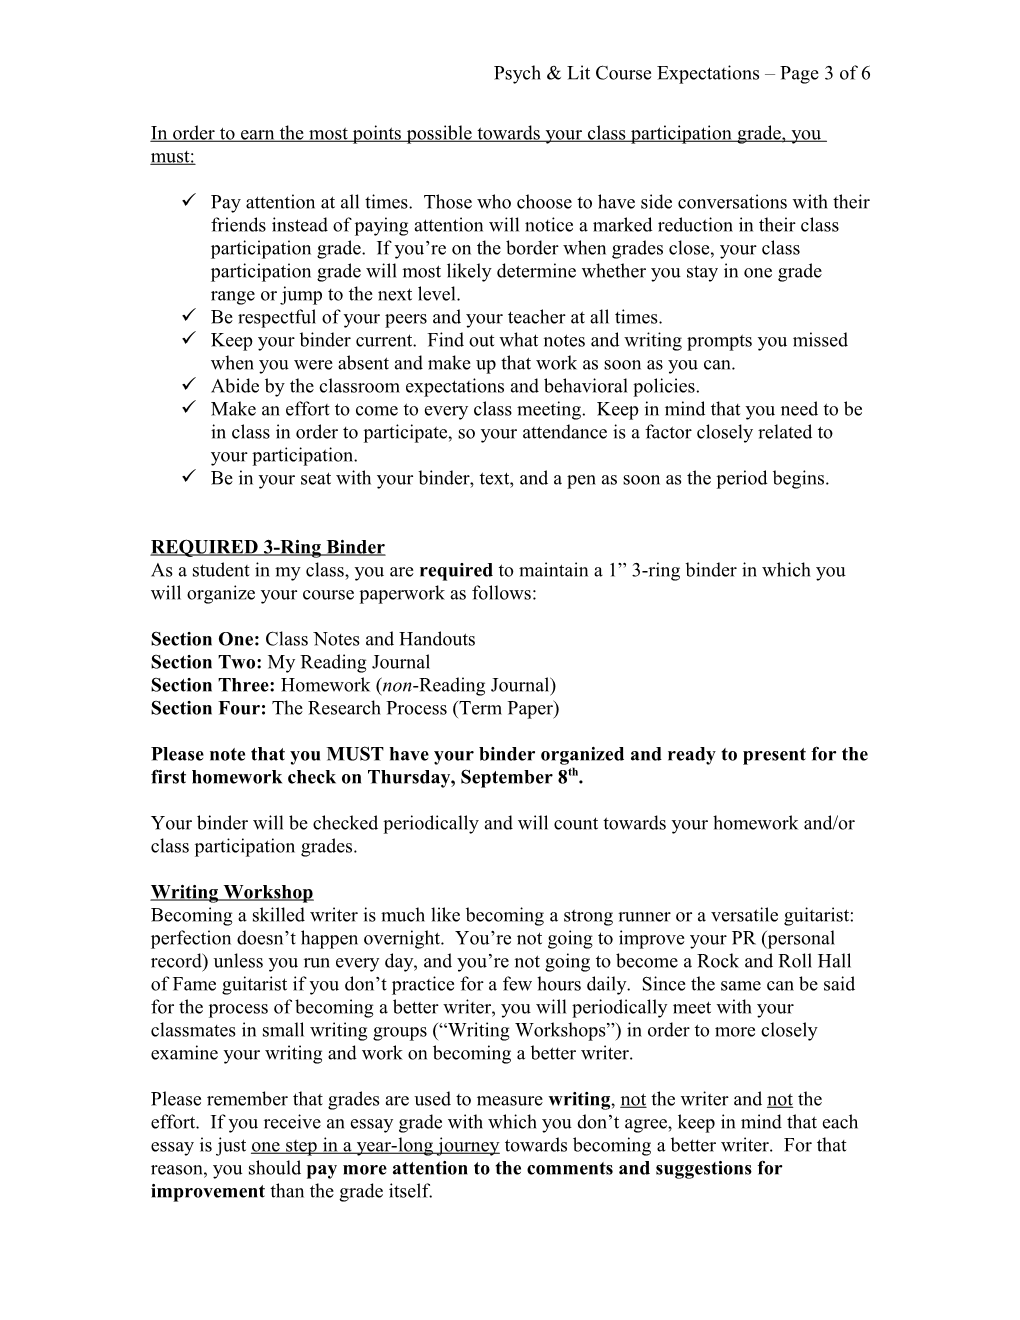 Psych & Lit Course Expectations Page 1 of 6